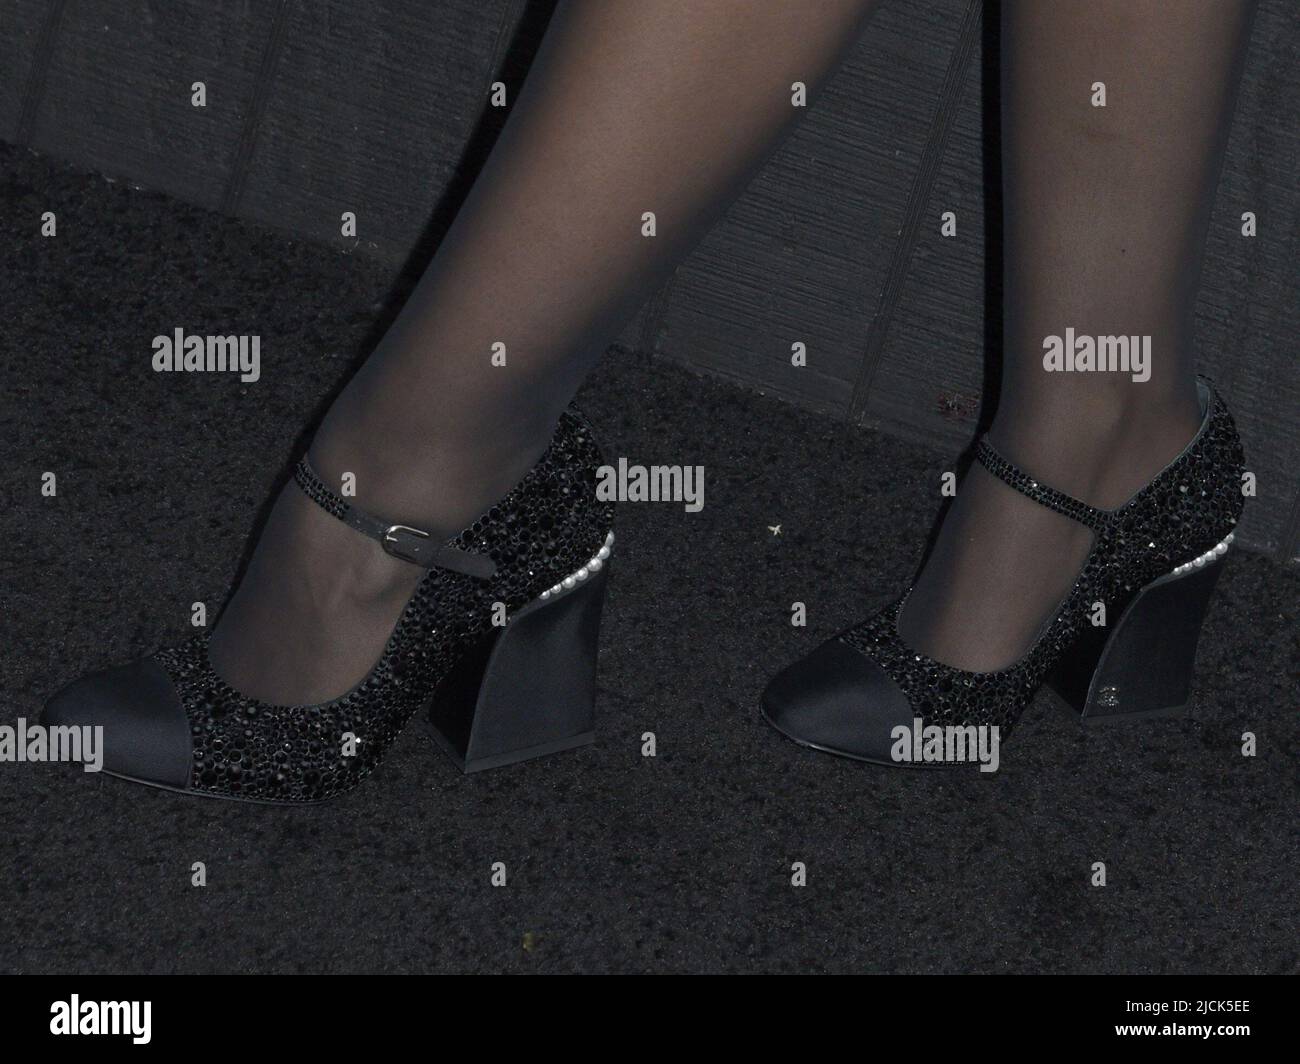 New York, NY, USA. 13th June, 2022. Whitney Peak's CHANEL shoes at